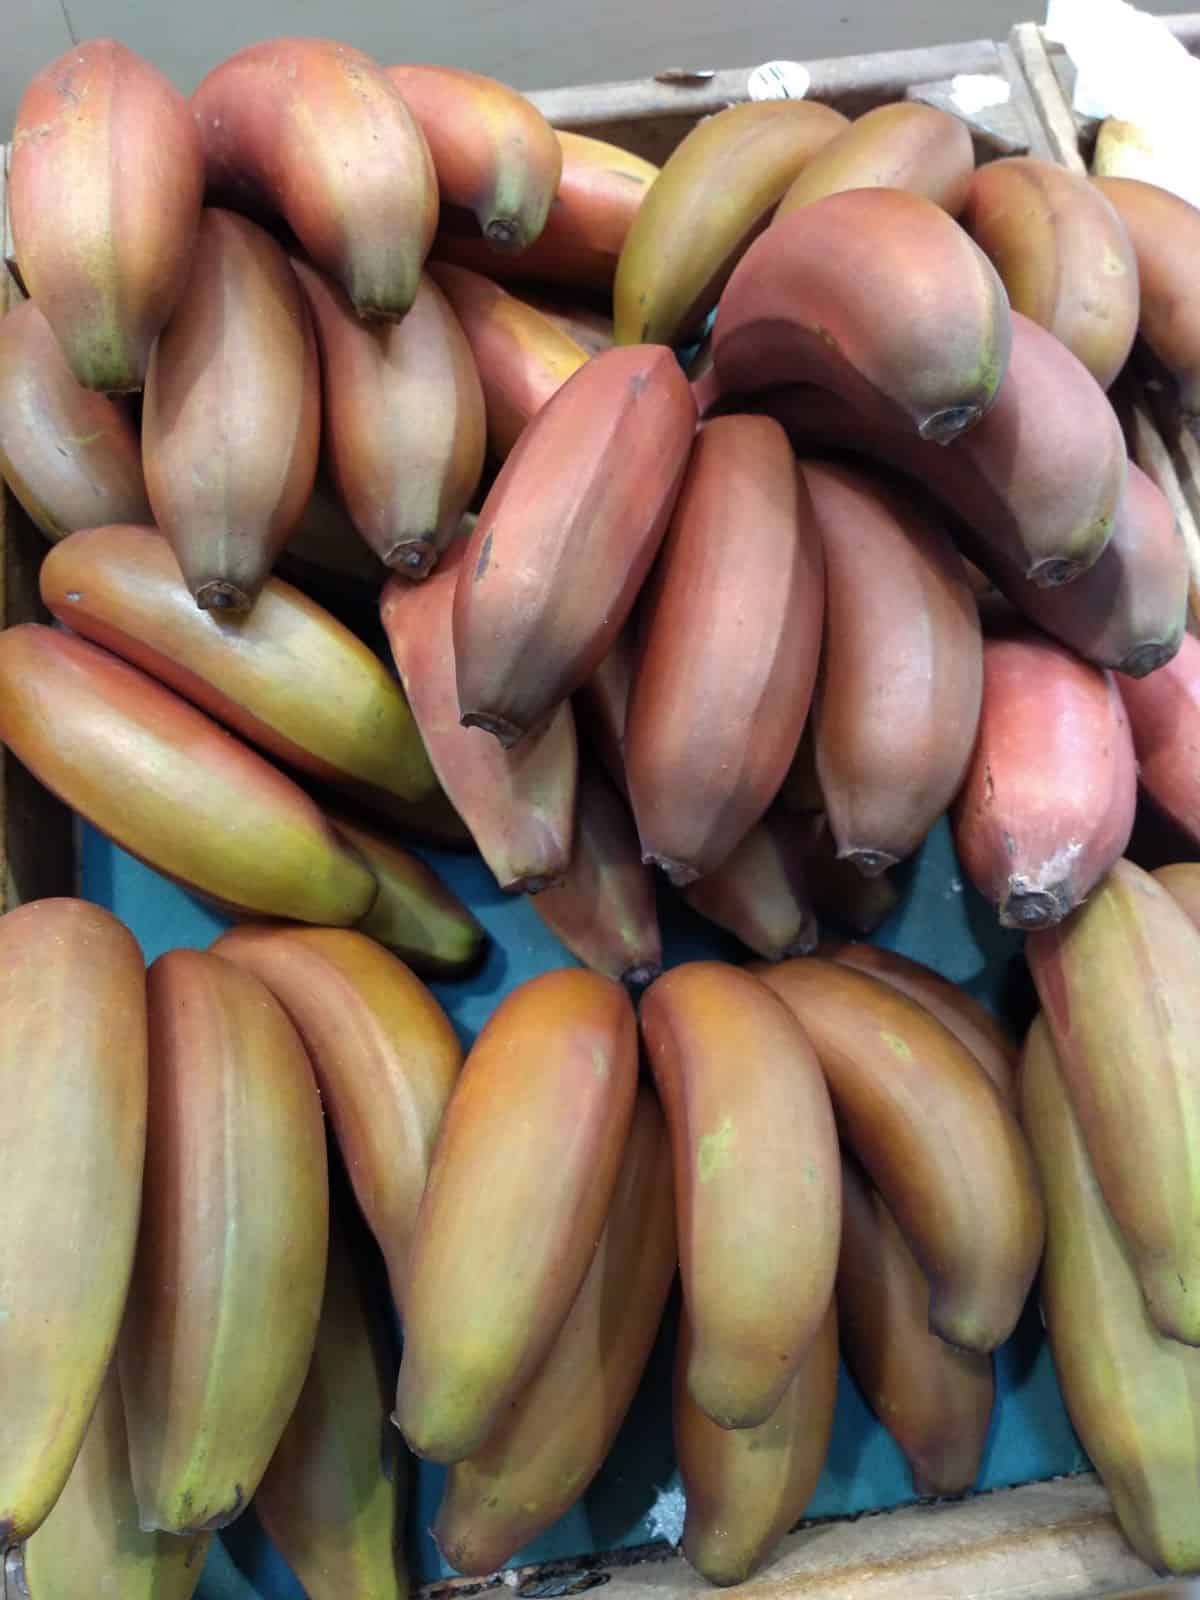 Unripe Red bananas in bunches at the store.